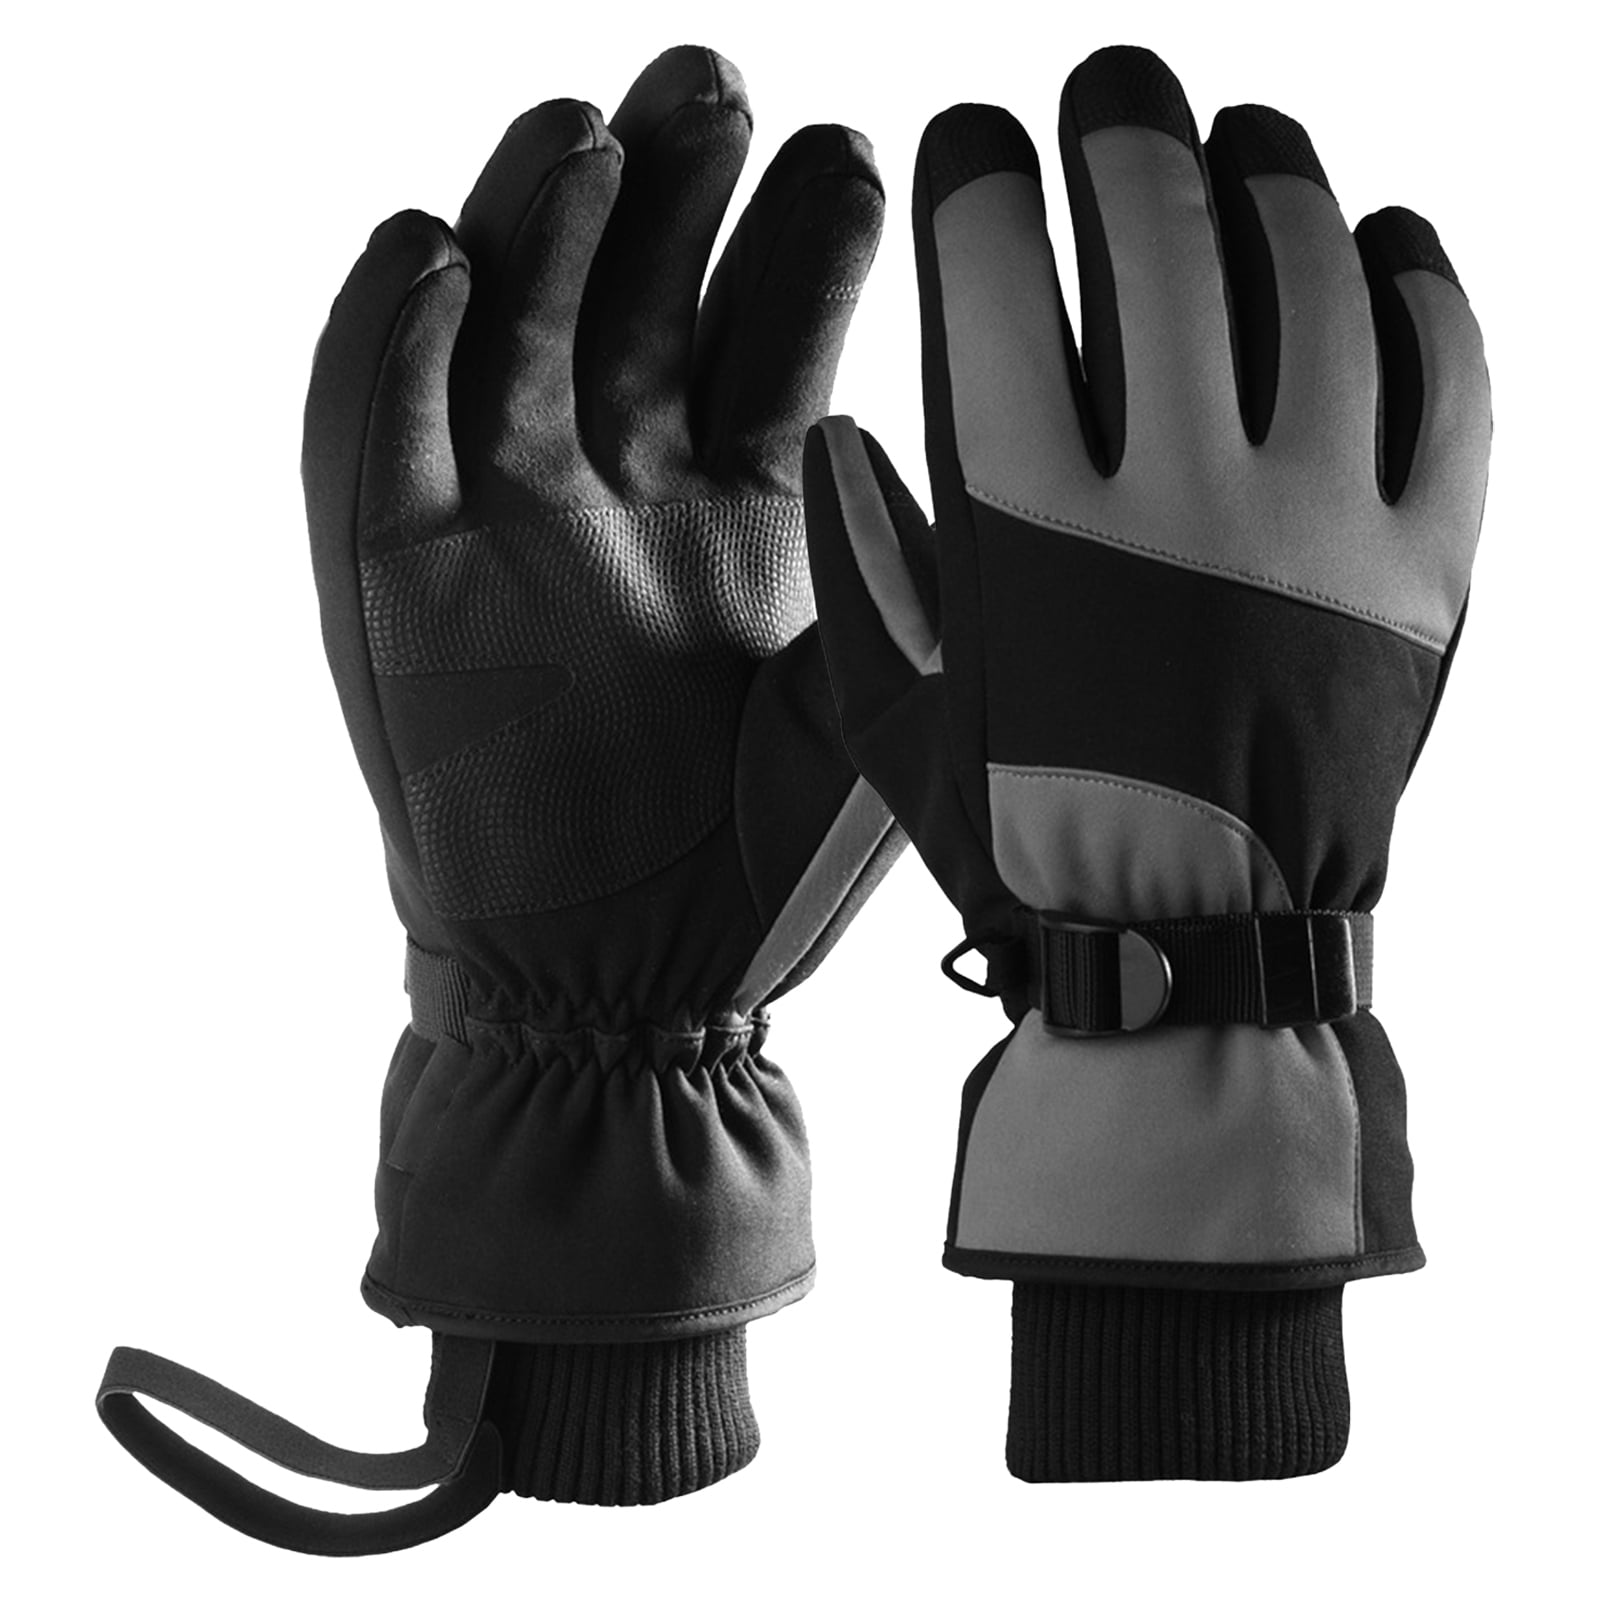 Details about   Waterproof Winter Cycling Gloves Windproof Outdoor Sport Ski Gloves For Bike 